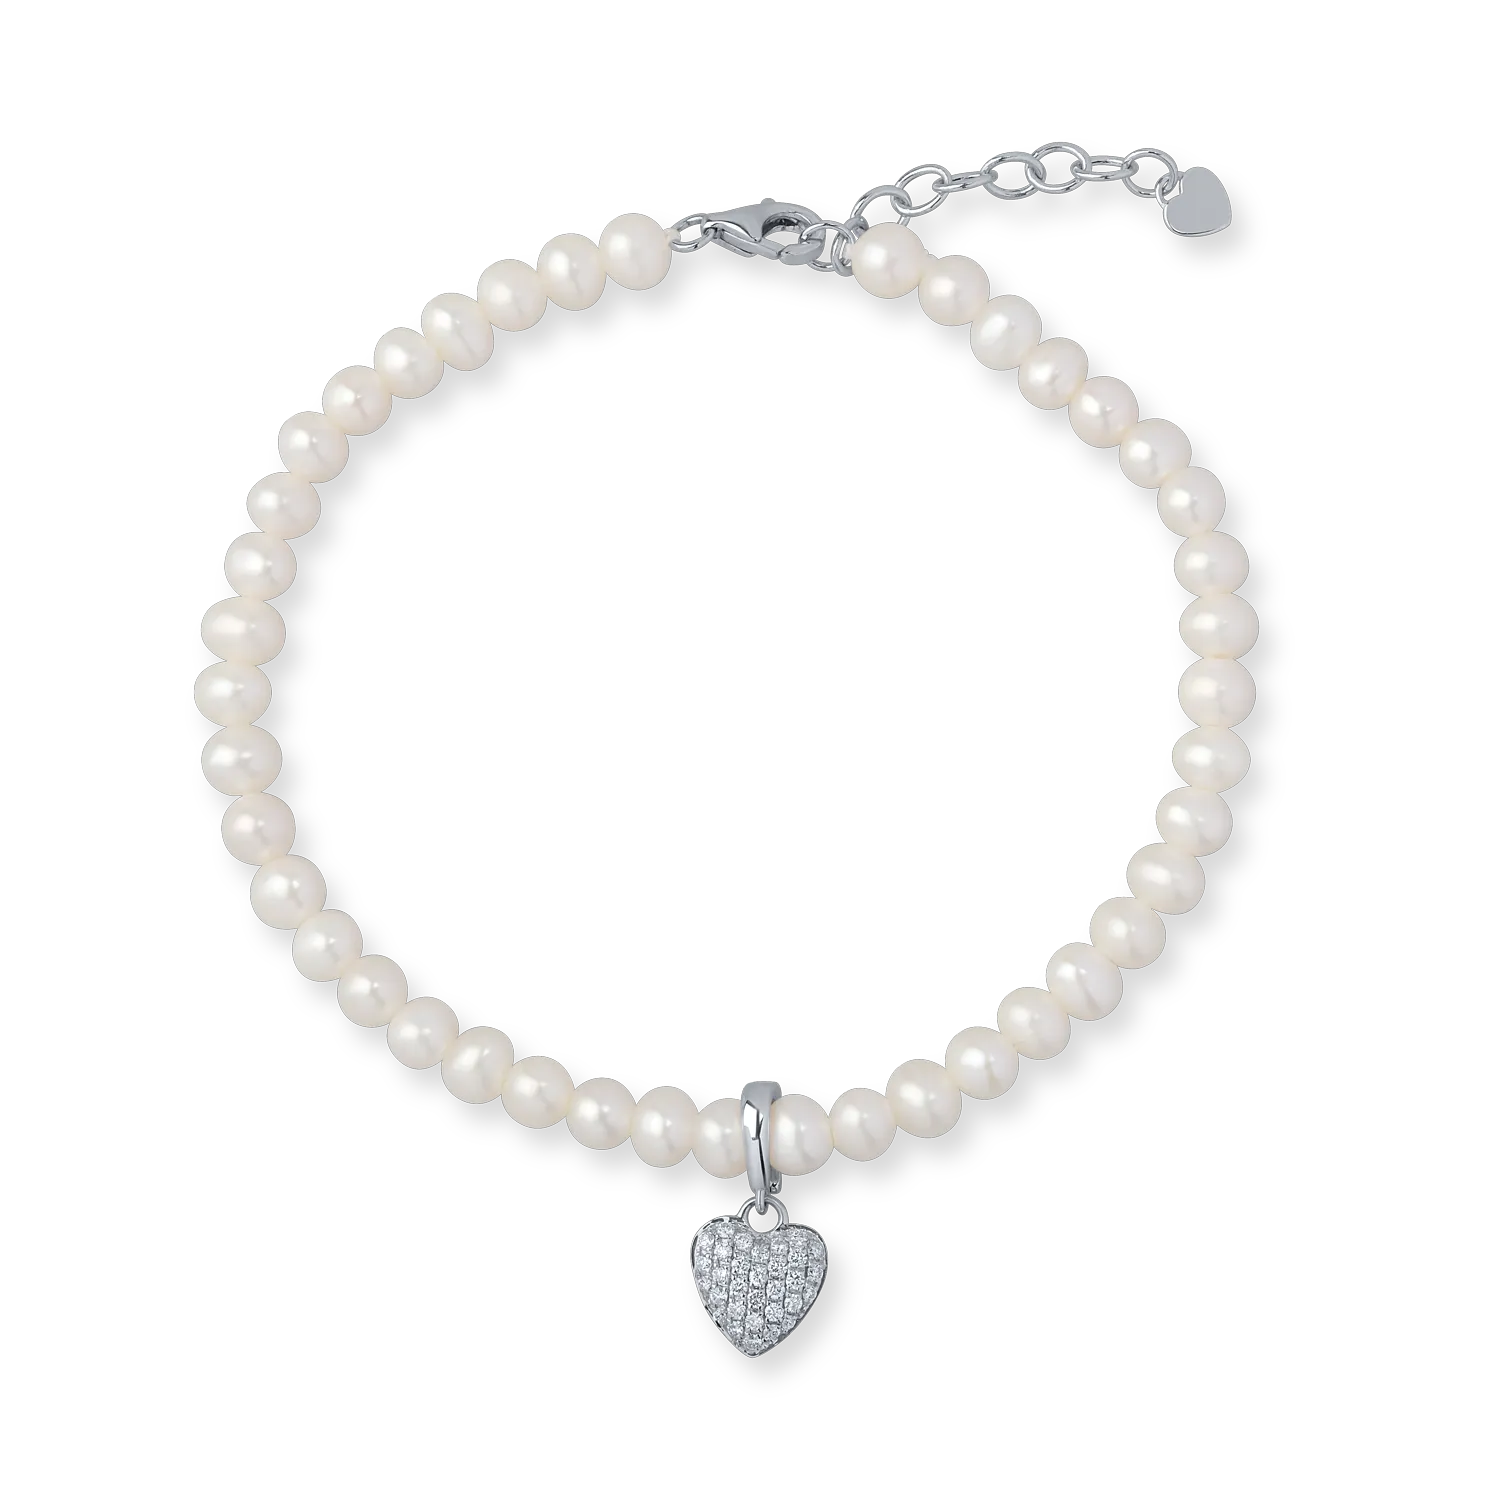 White gold heart charm bracelet with 22.08ct fresh water pearls and 0.1ct diamonds